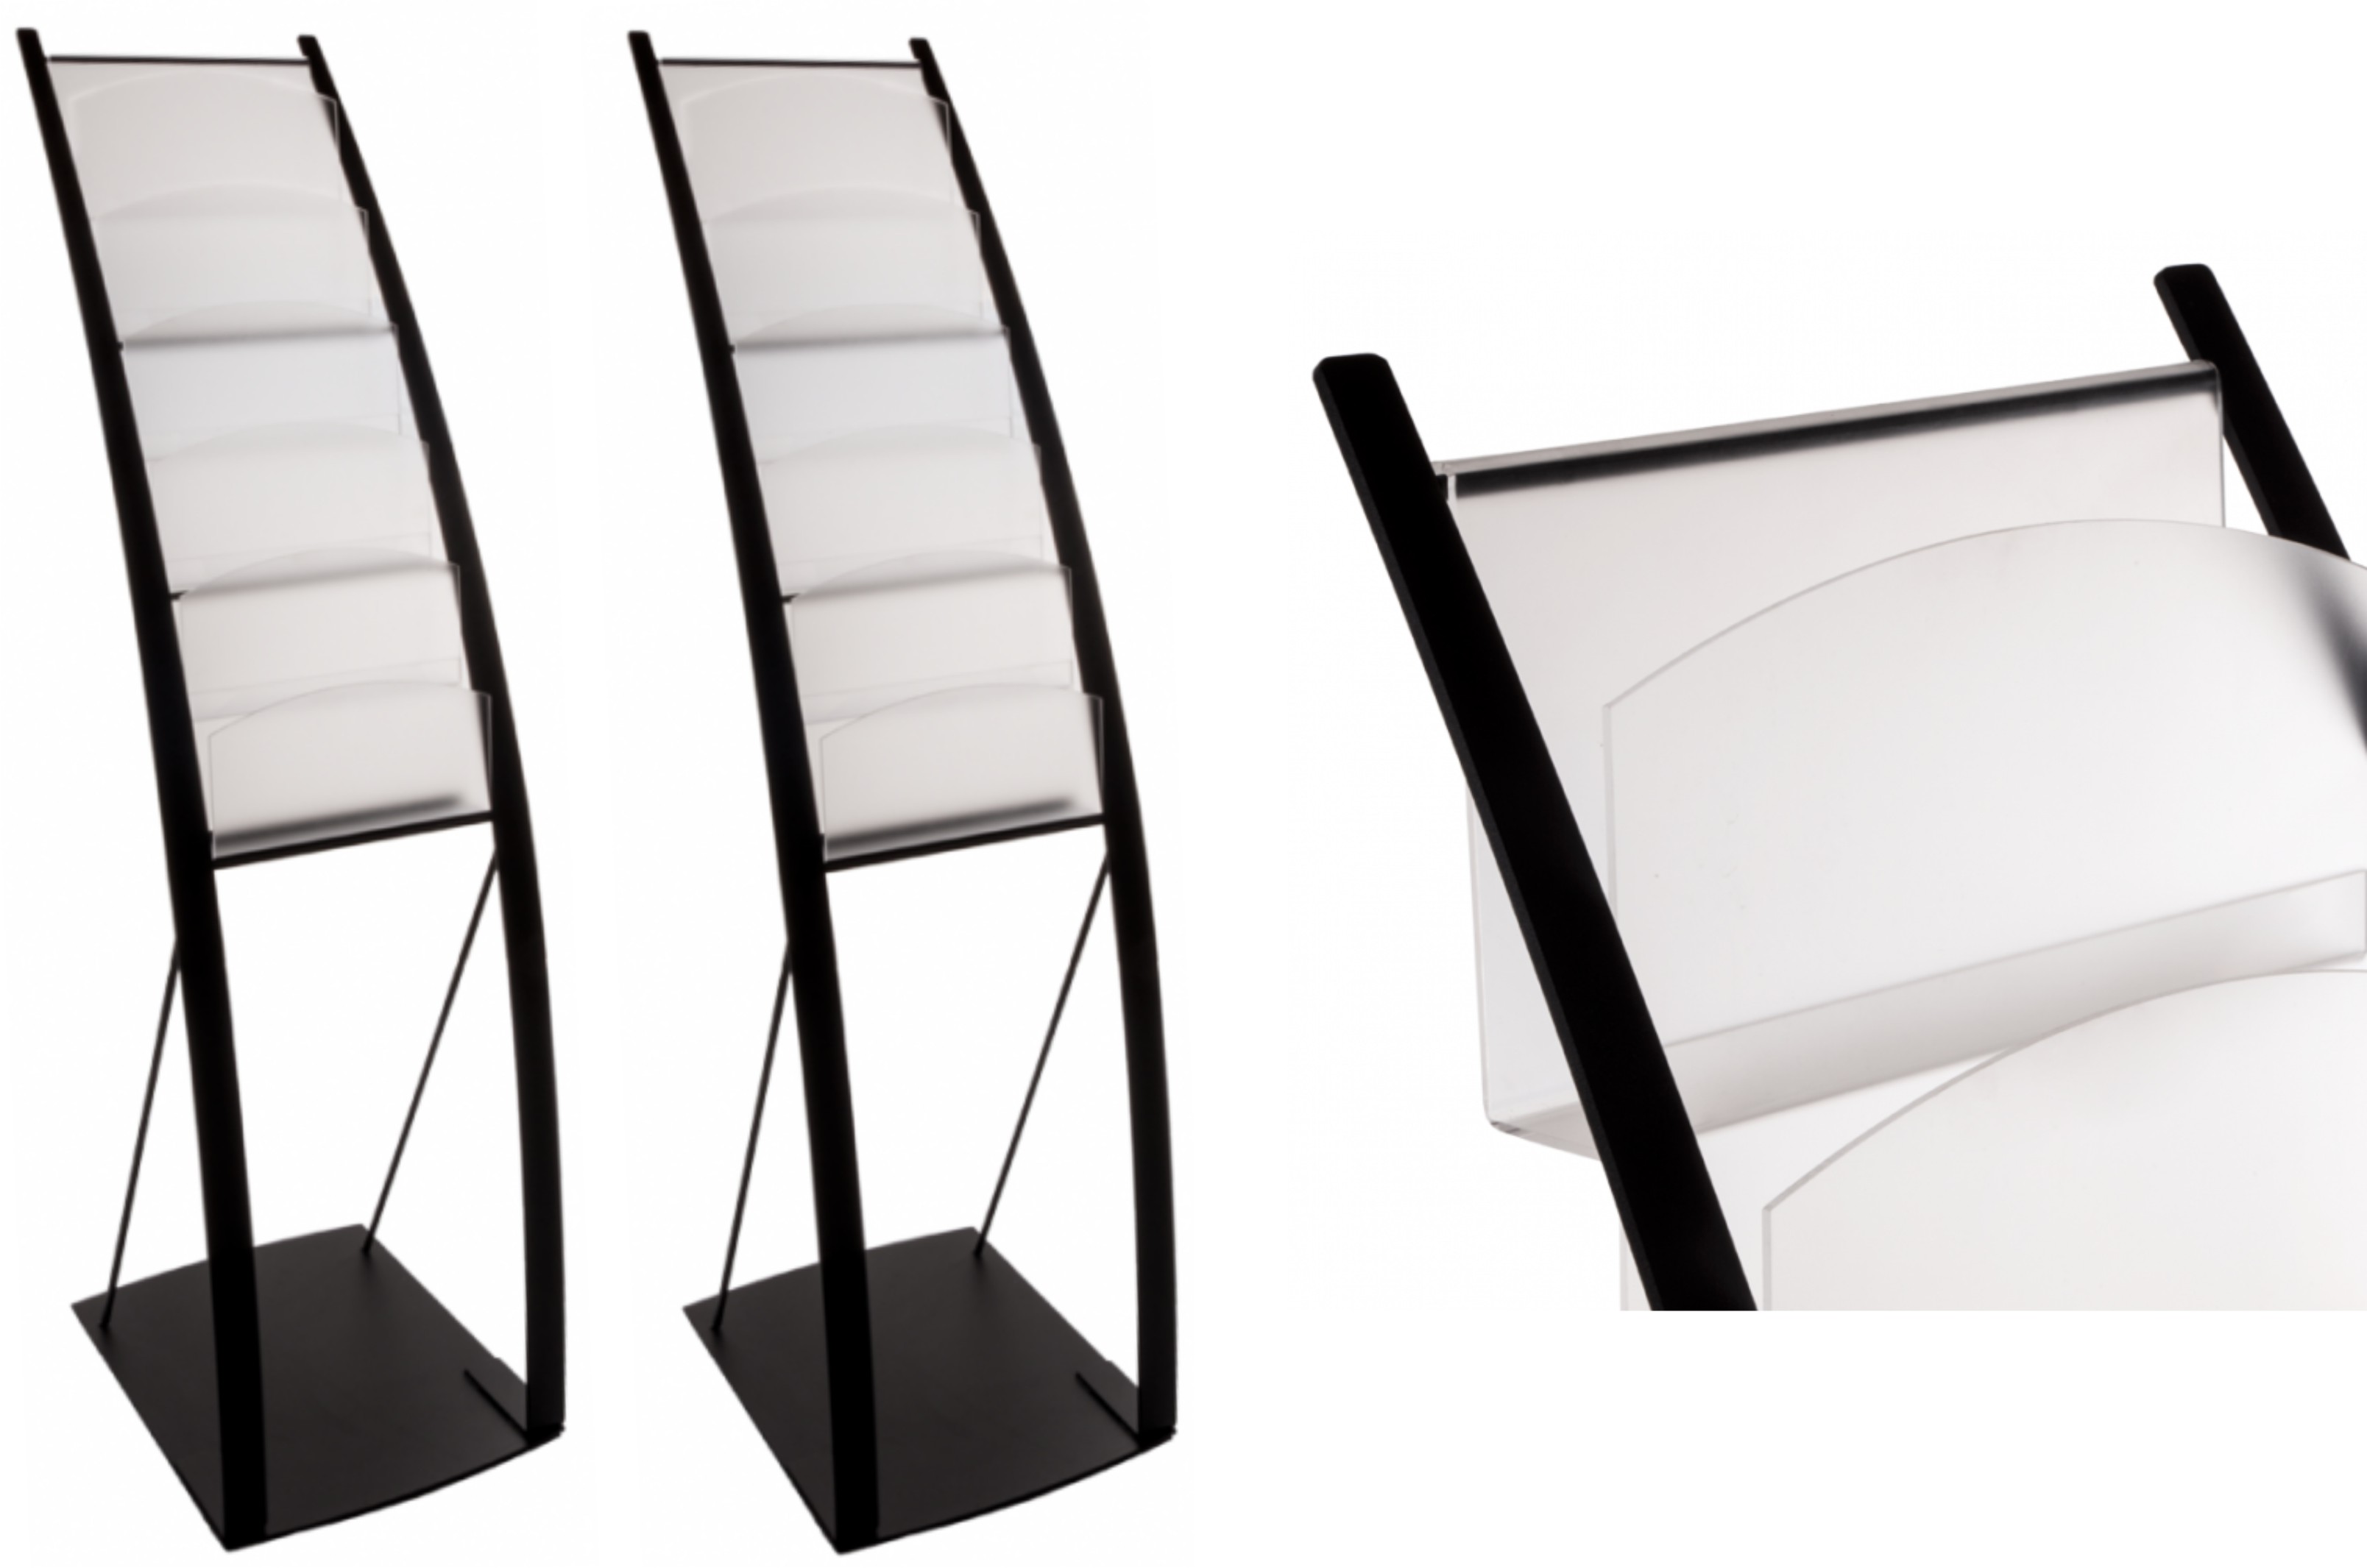 The Onyx Freestanding Literature Display Stand